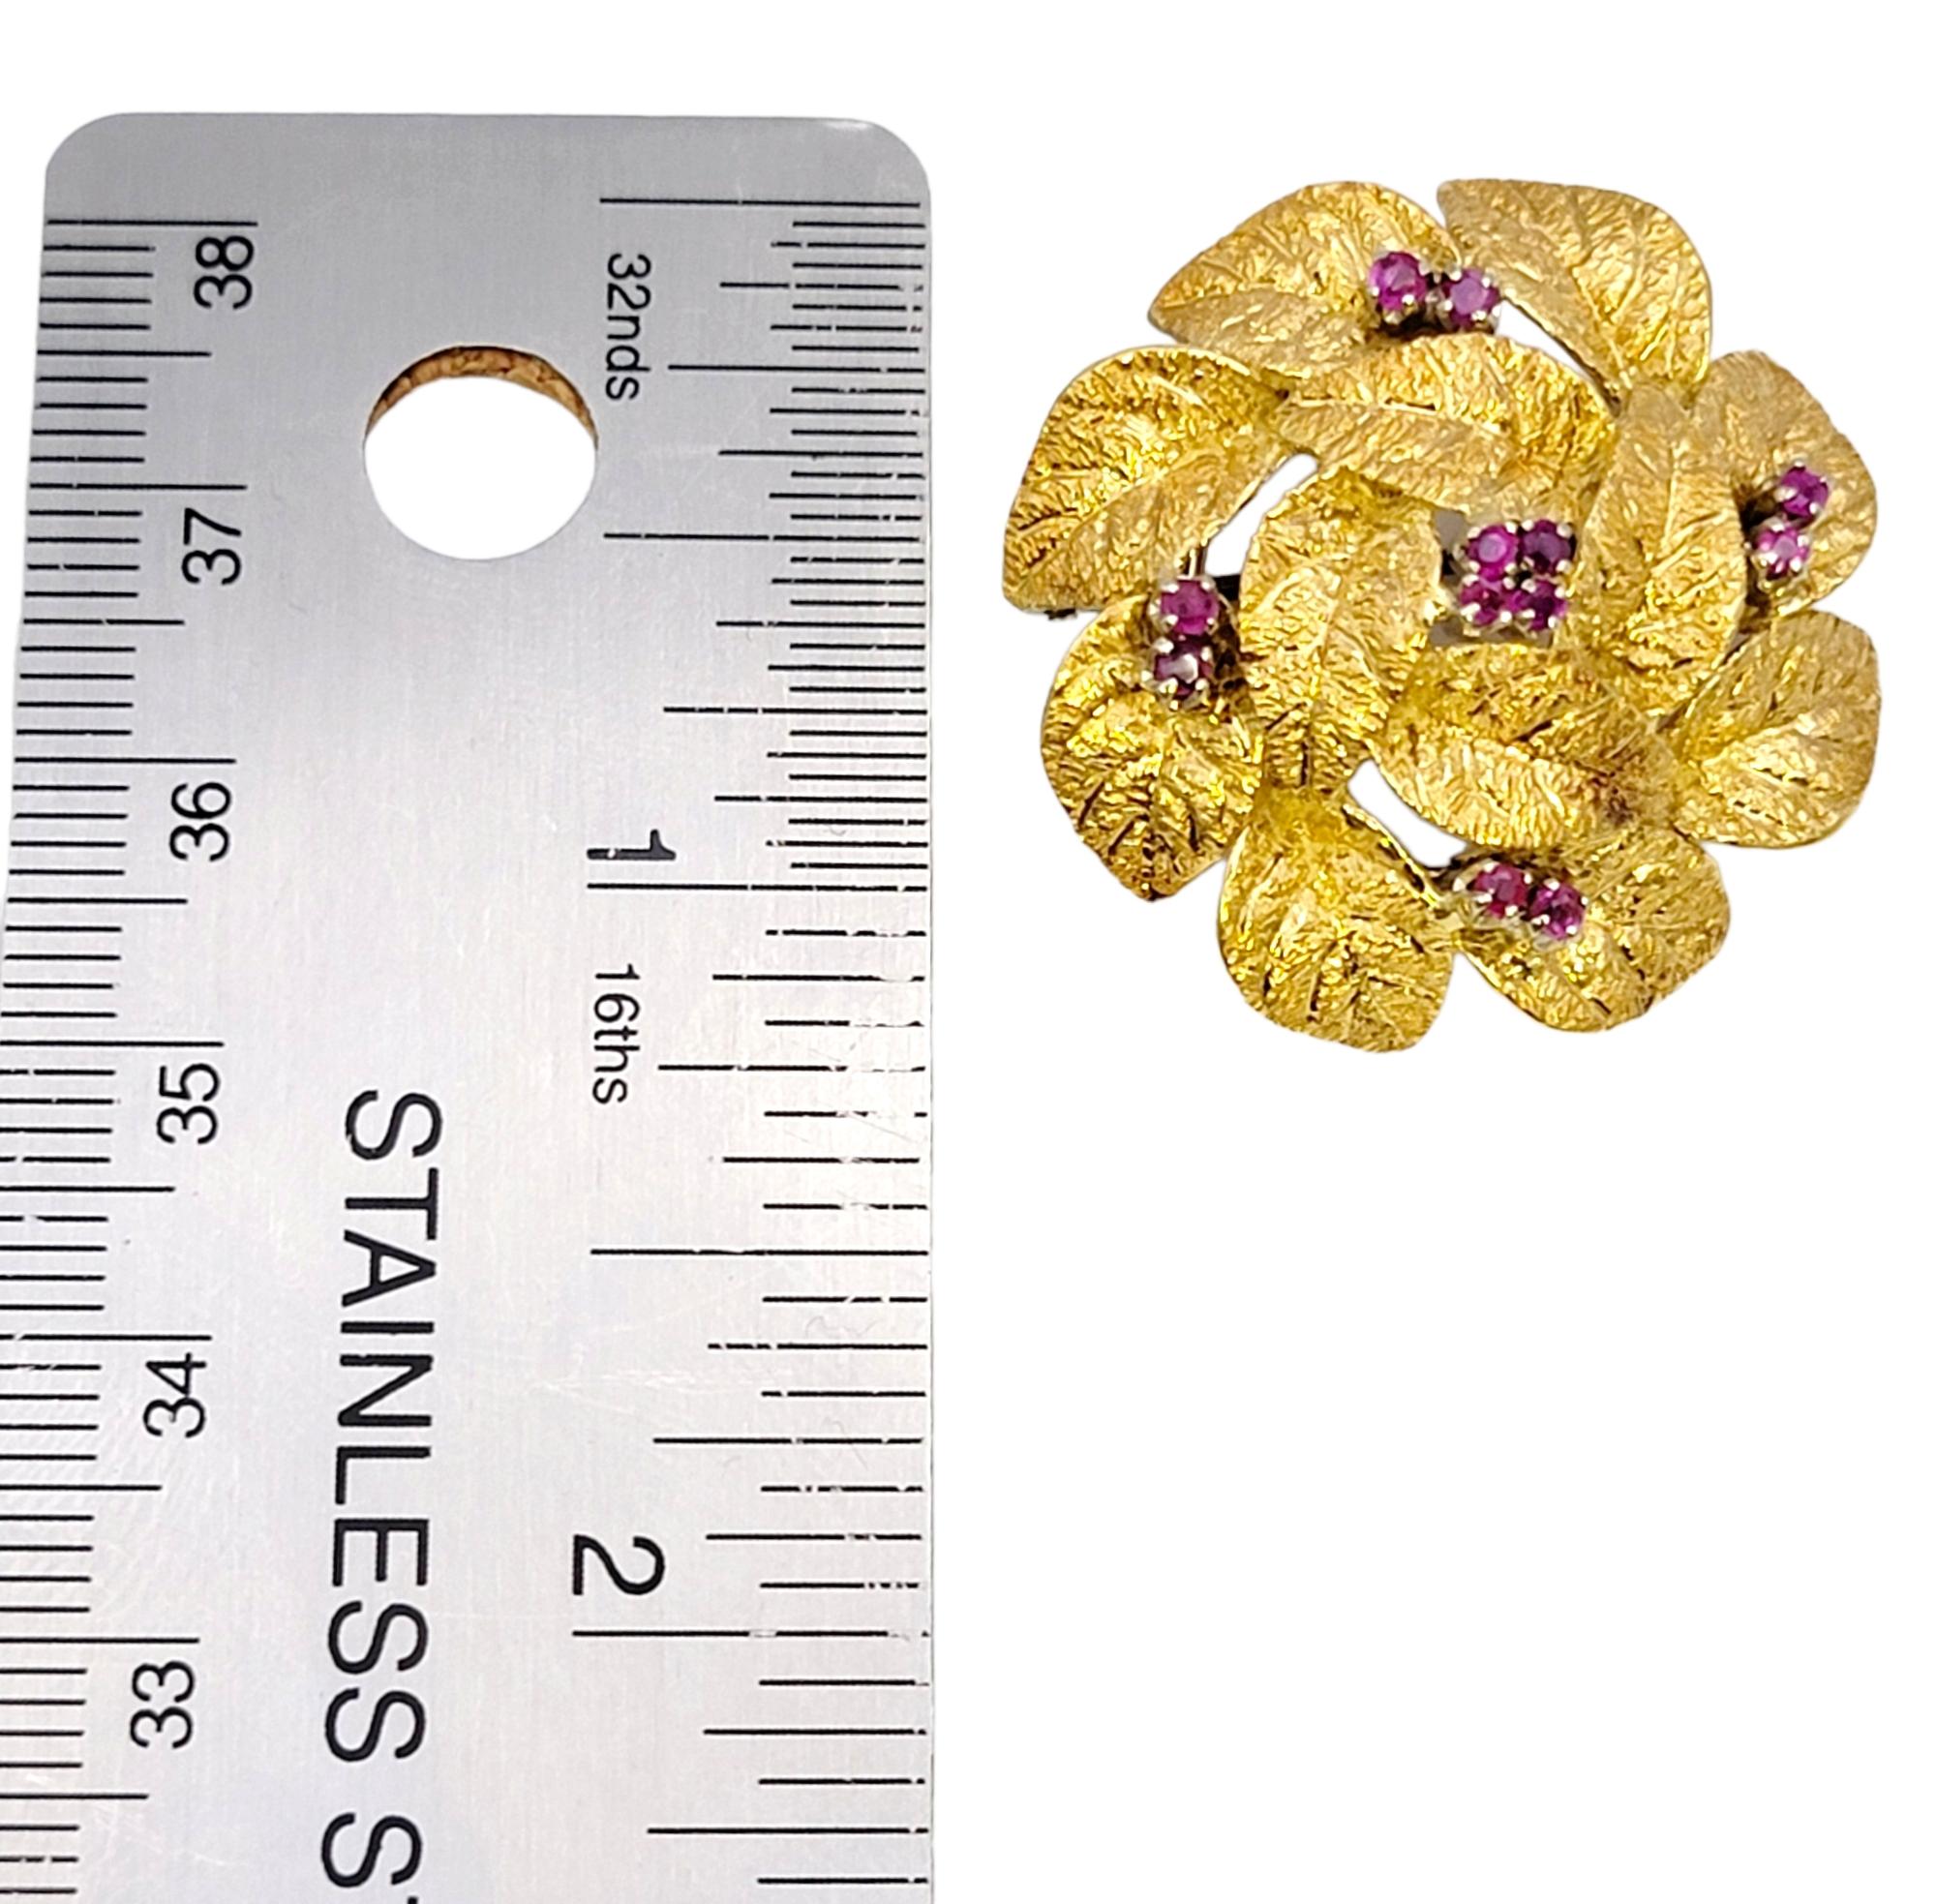 Textured 18 Karat Yellow Gold Wreath Motif 3D Brooch with Natural Ruby Accents For Sale 8